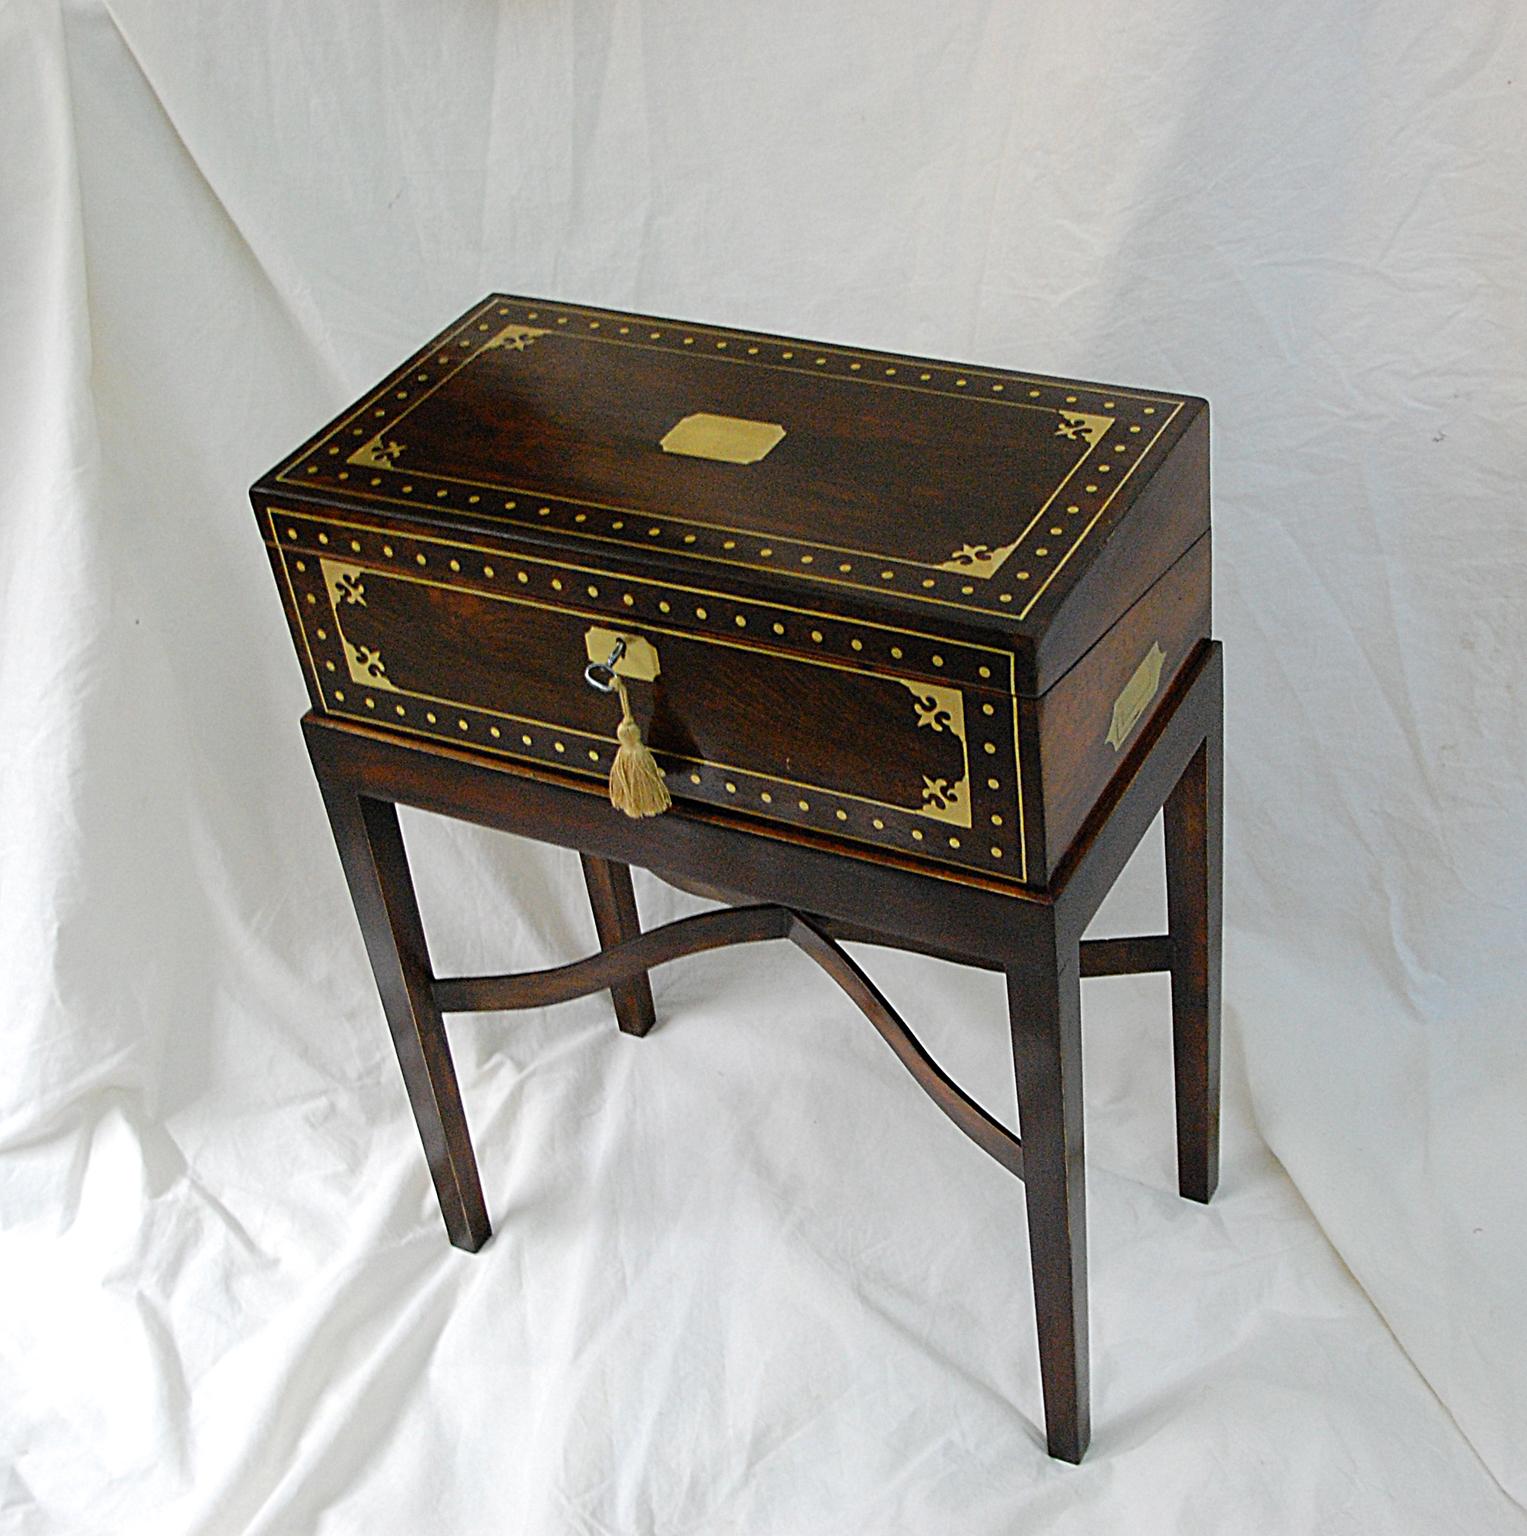 English Regency period rosewood writing box, elaborately inlaid with brass, now on a custom made stand with arched cross stretcher. The interior of the writing box has a sloping tooled leather writing surface, covered pencil/pen holder, inkwell, and